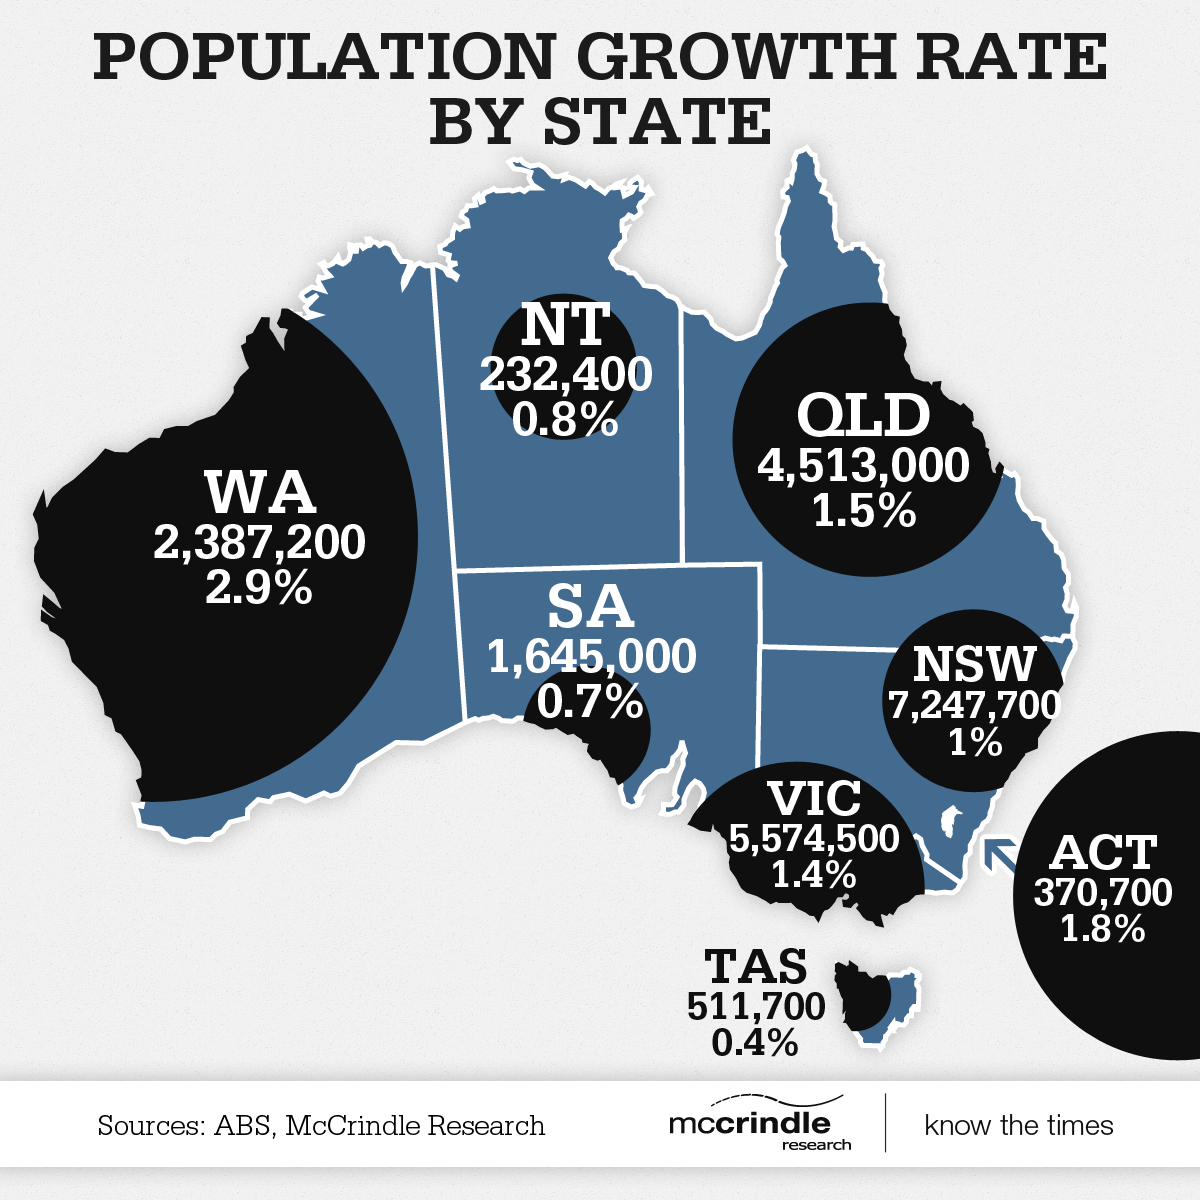 census-day-population-statistics-part-2-growth-rate-by-state-infographic-mccrindle